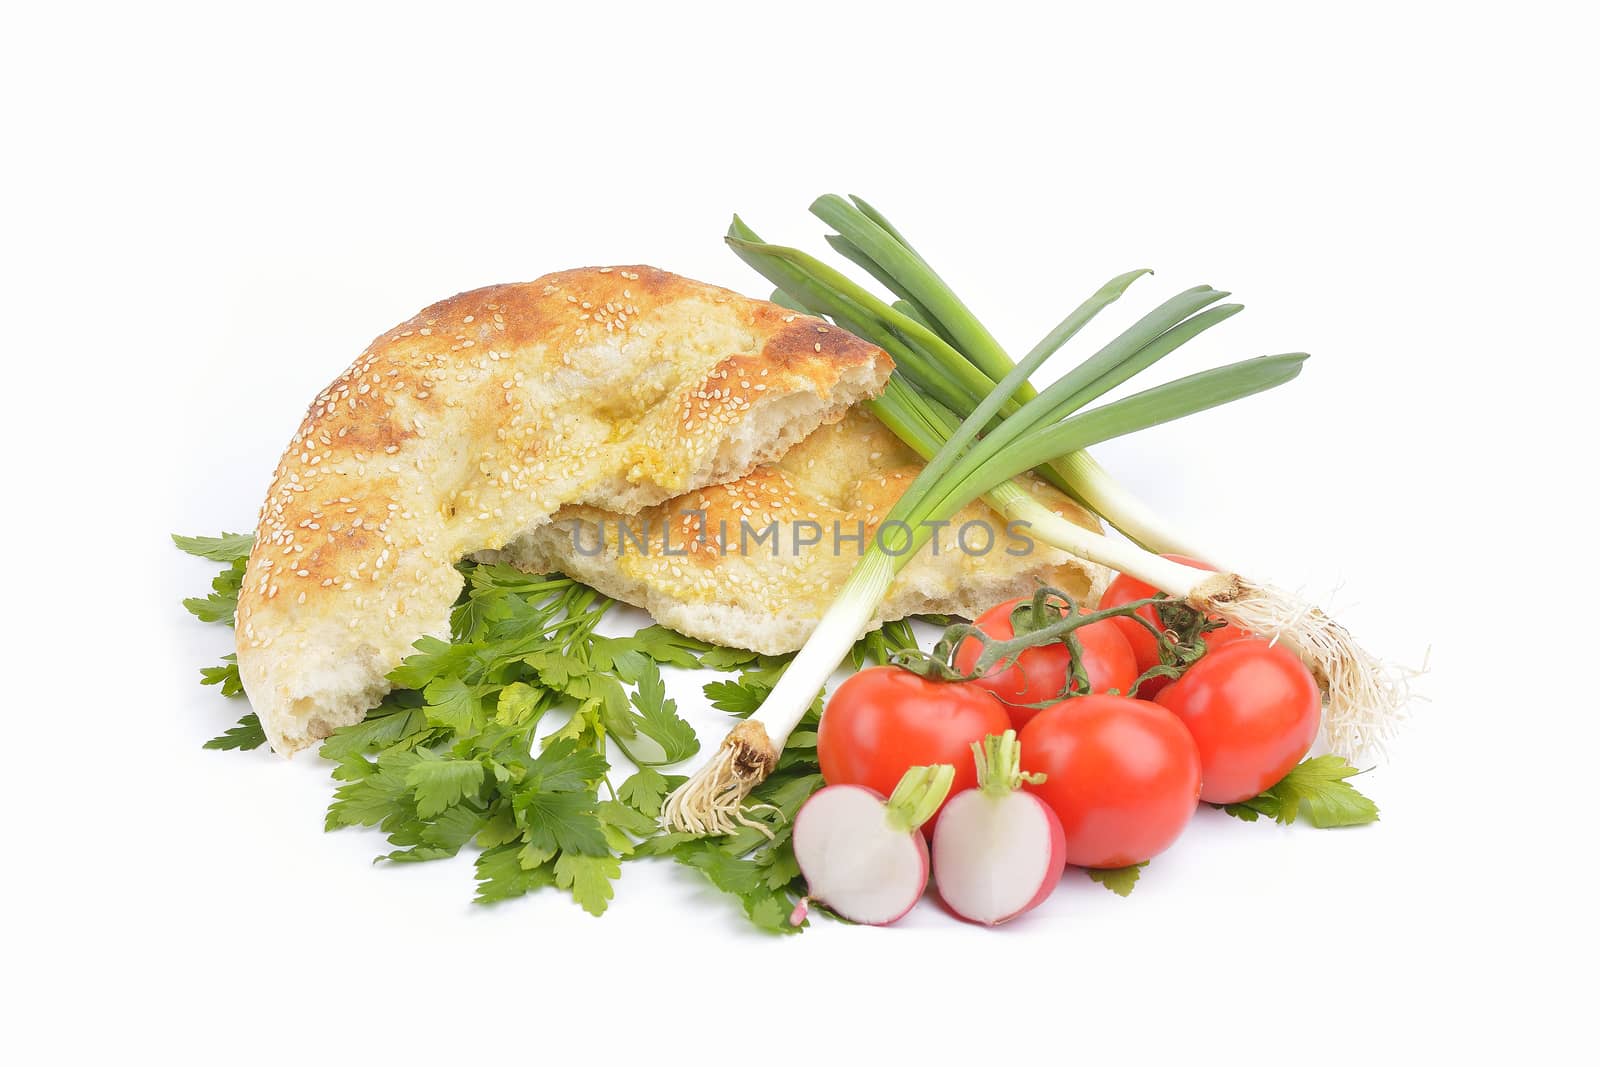 fresh homemade natural bread with vegetables  on white background by constantinhurghea